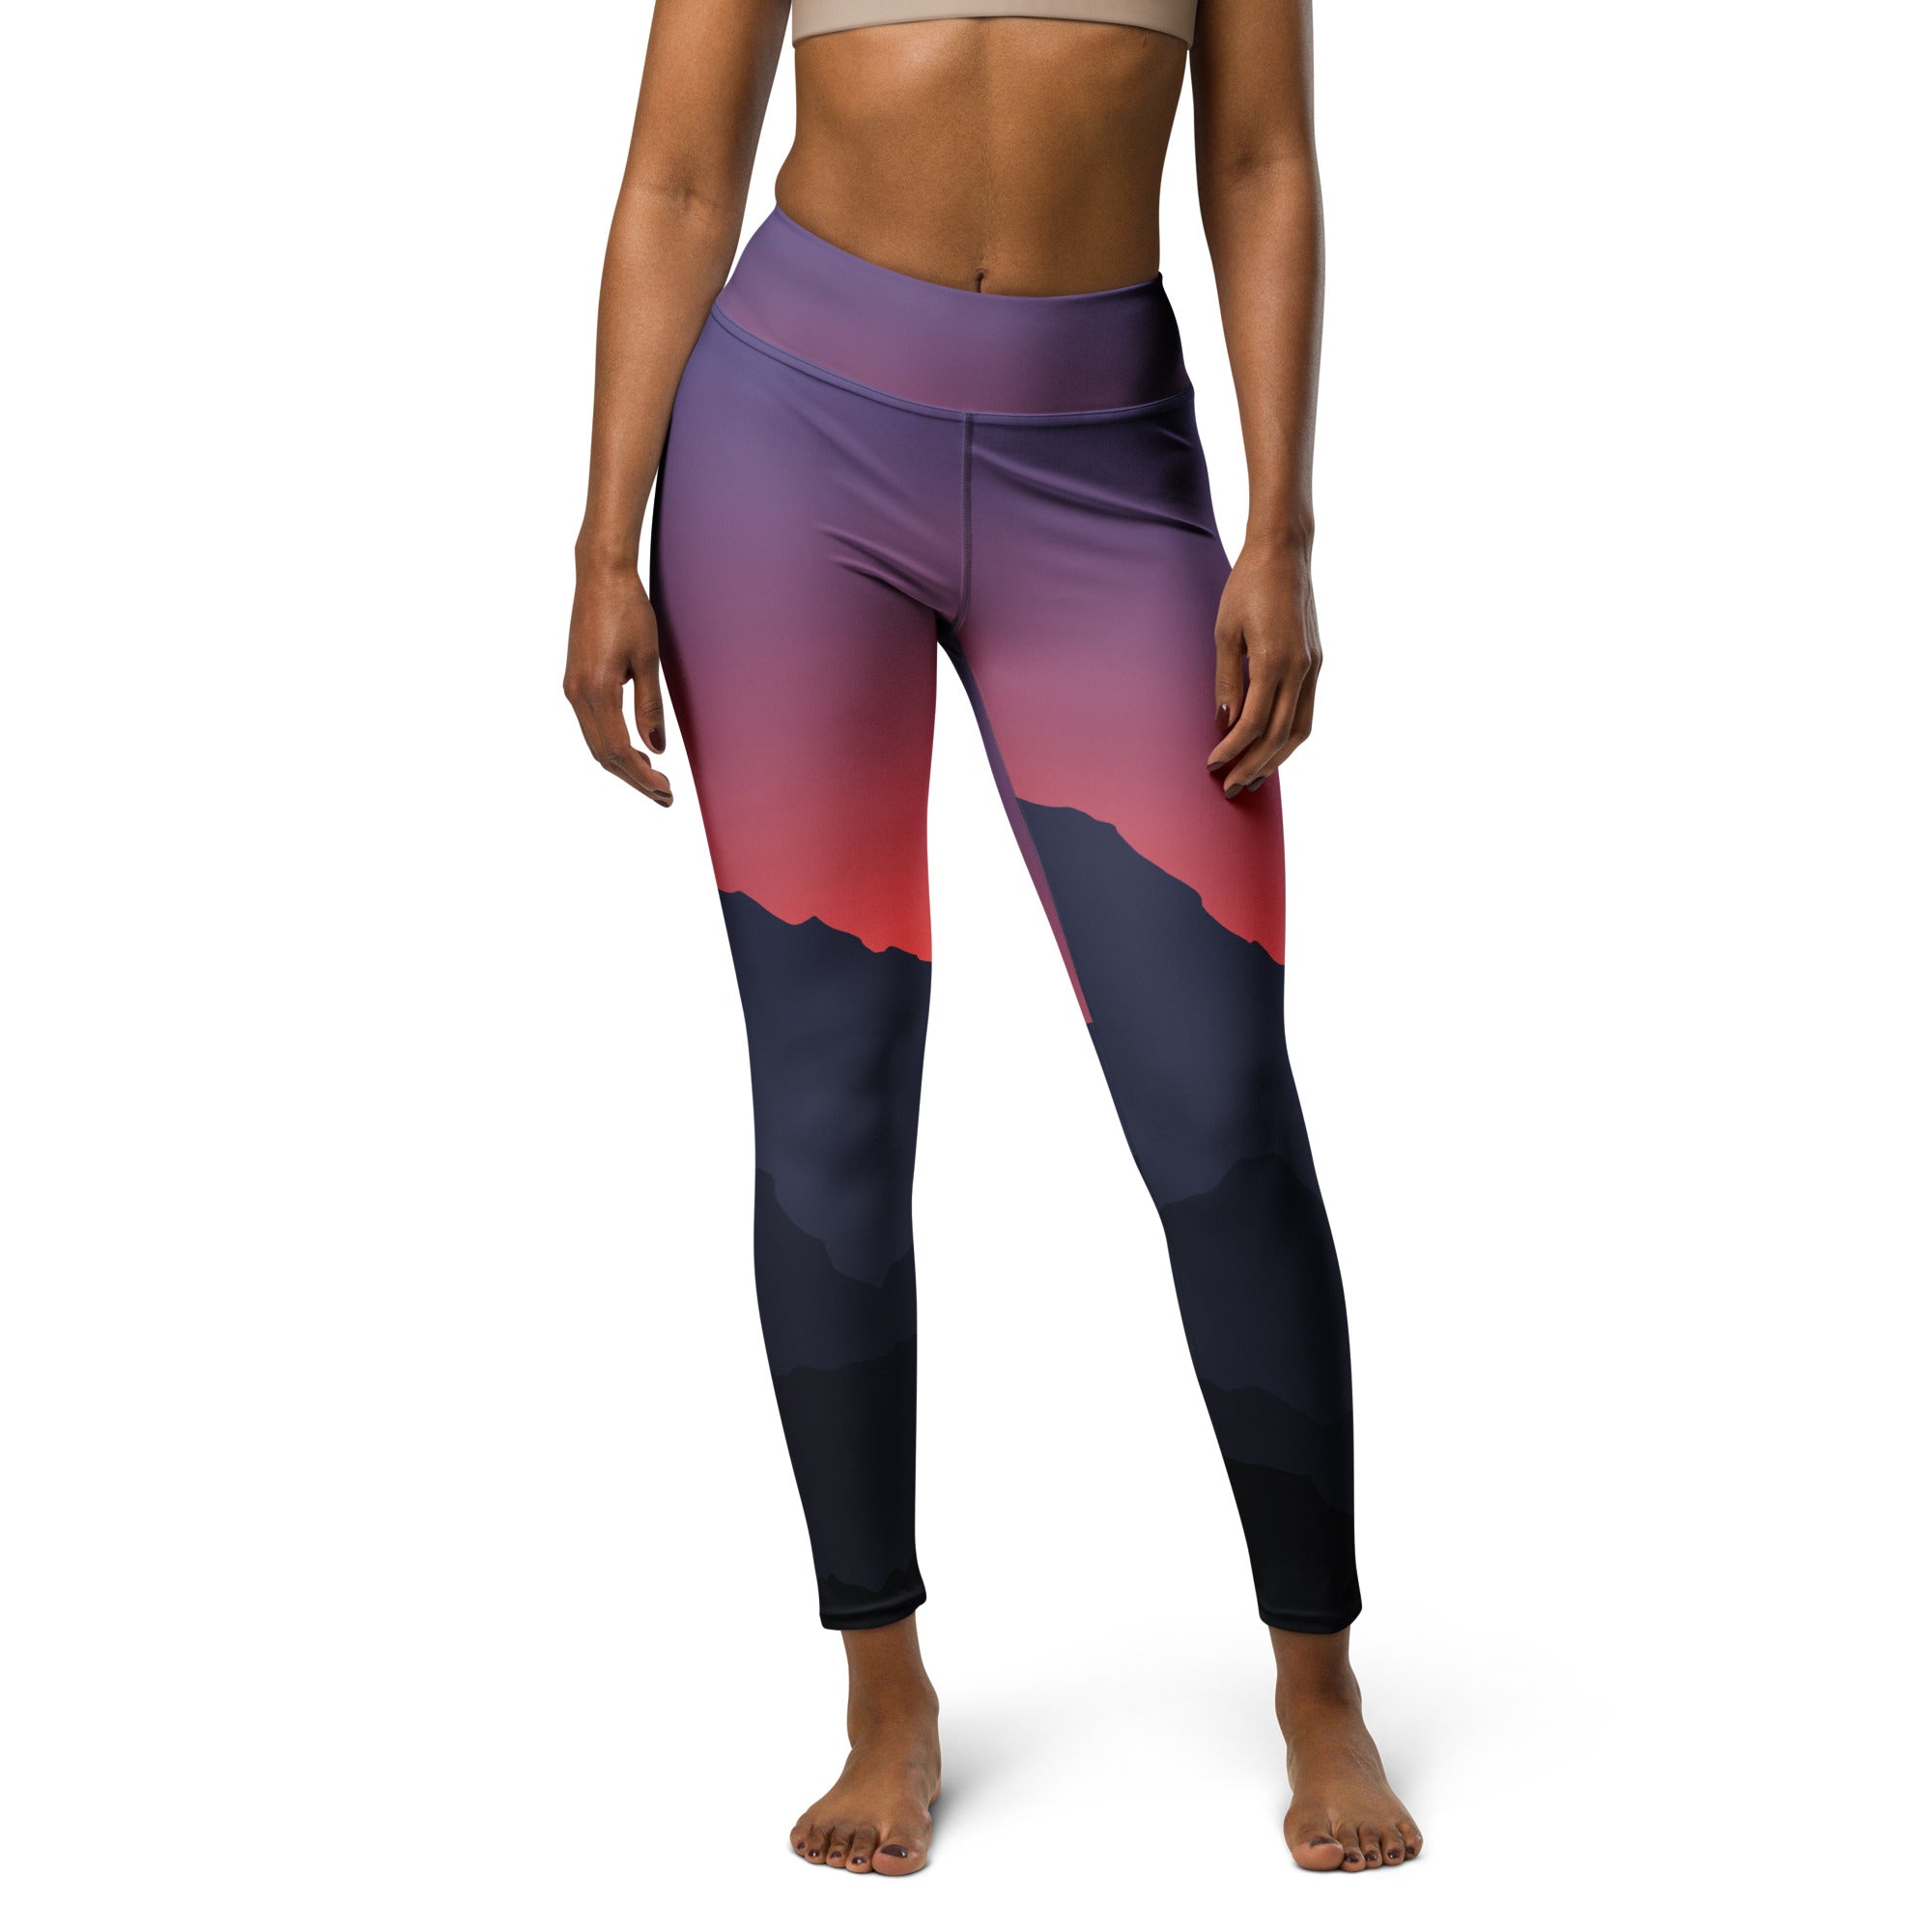 High-Rise Ankle Just Breathe Leggings  Free people activewear, Boho  outfits, Marled knit